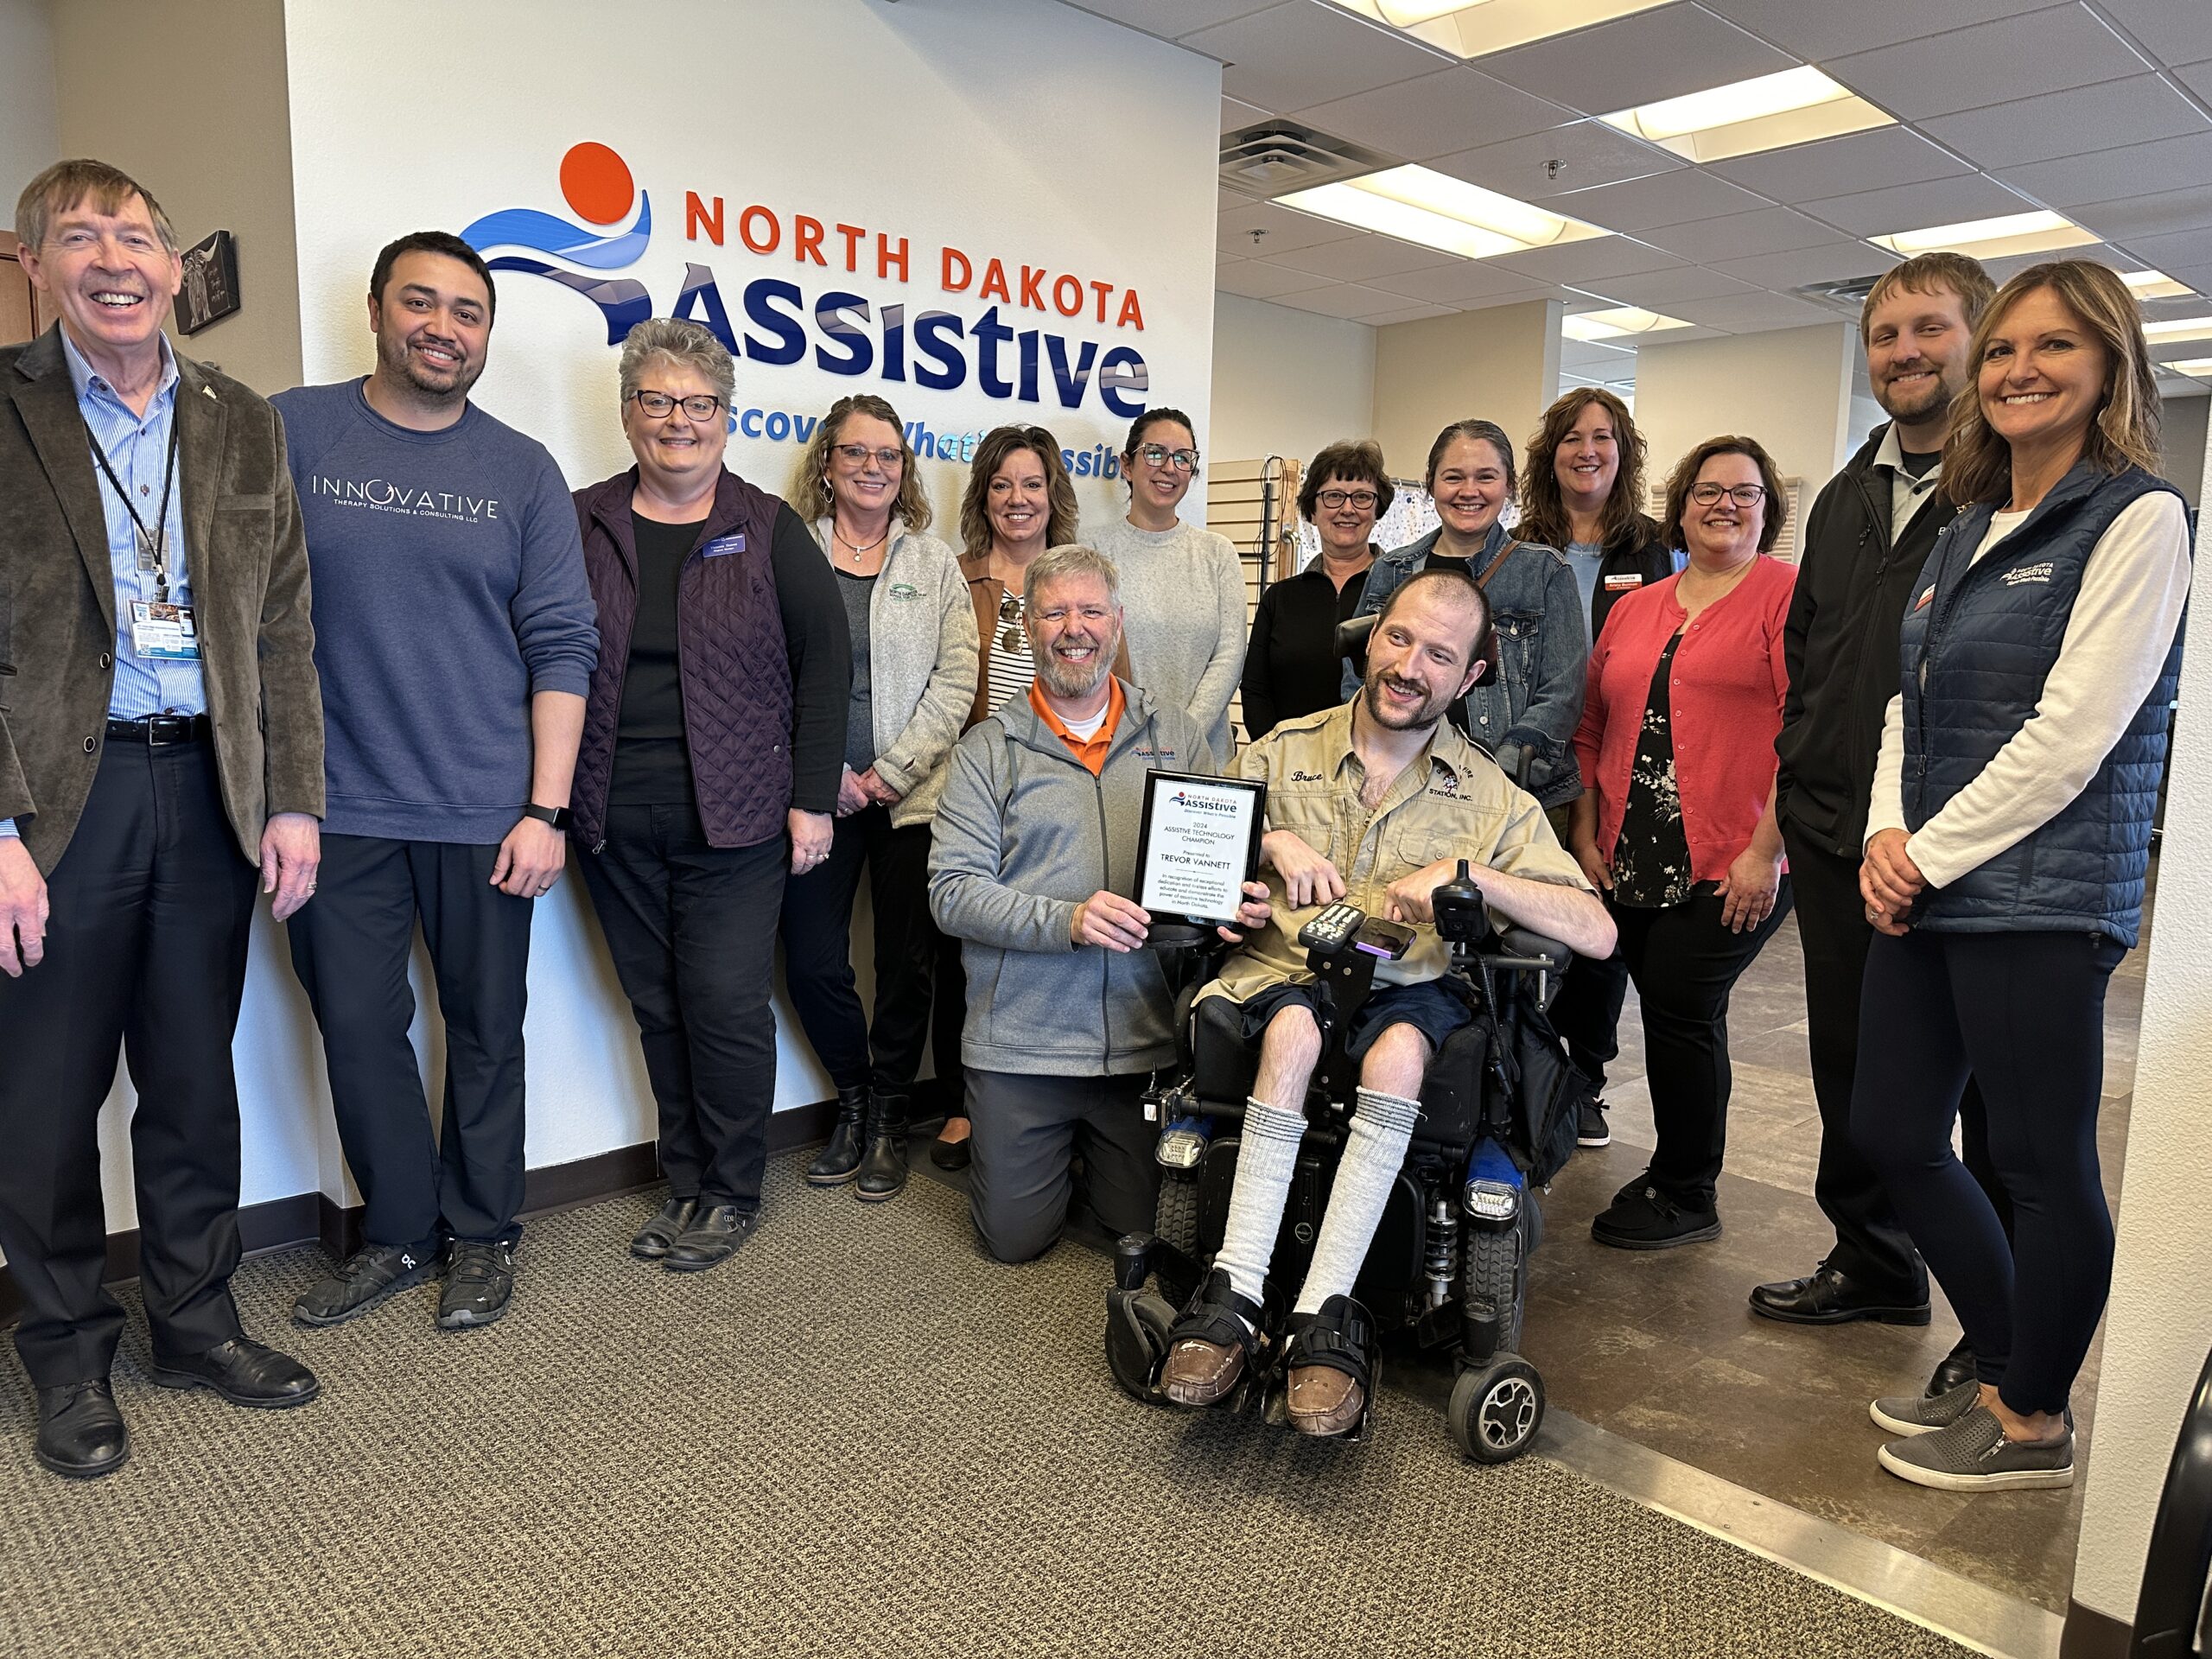 Friends of North Dakota Assistive gather in the Bismarck office to celebrate state and national Assistive Technology Awareness Day.